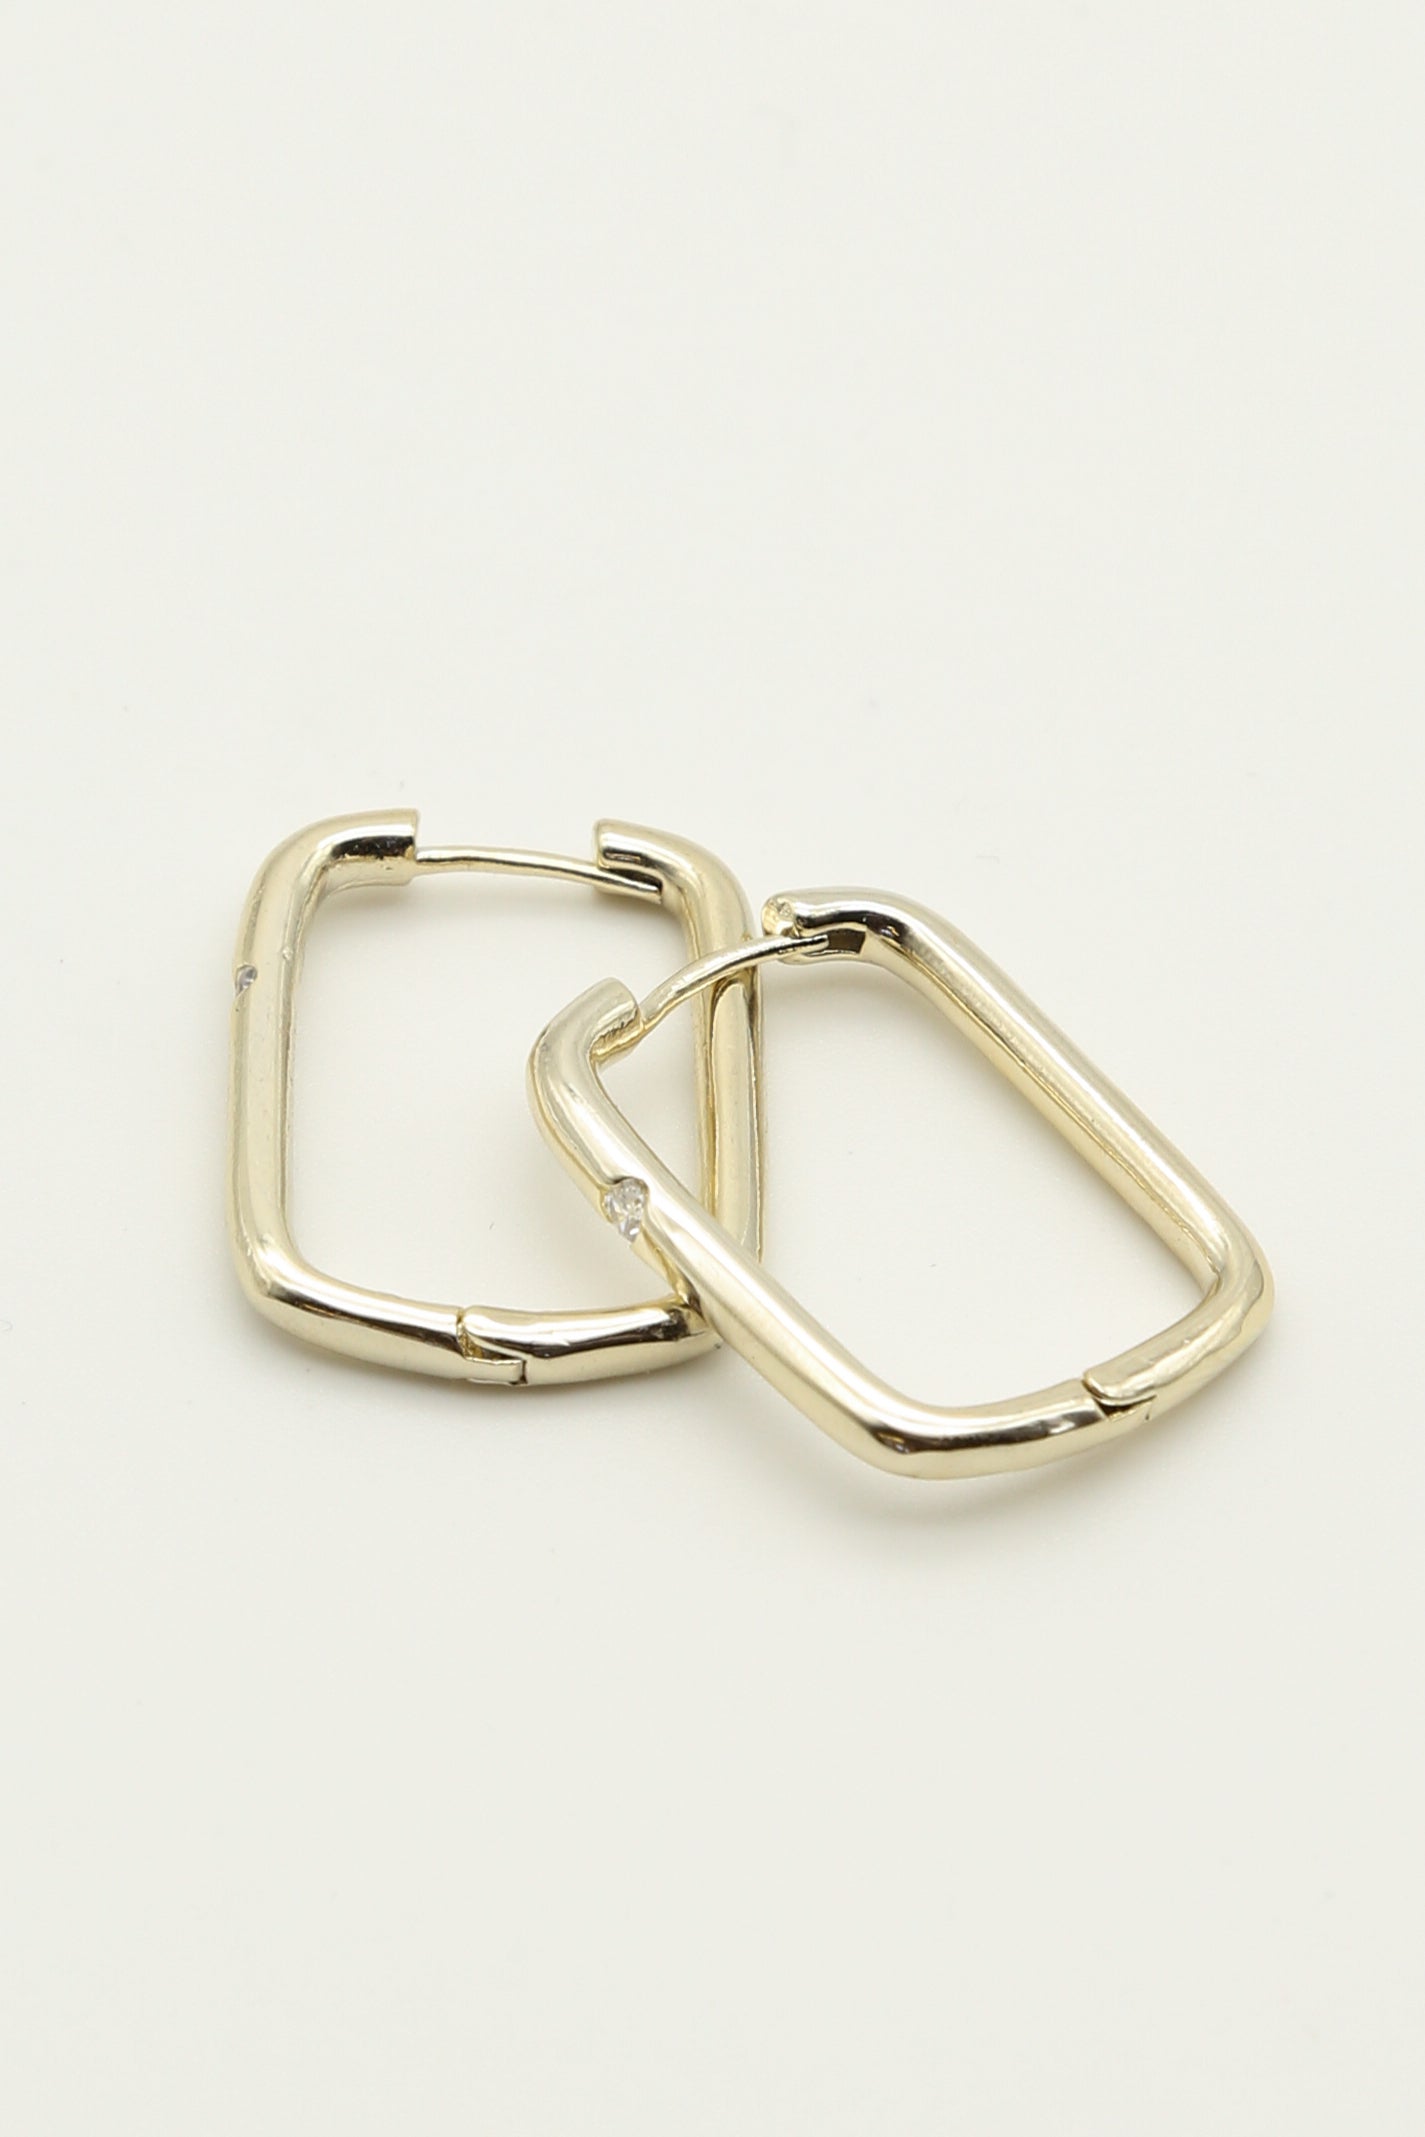 Gold Rounded Edge Square Hoop Earrings